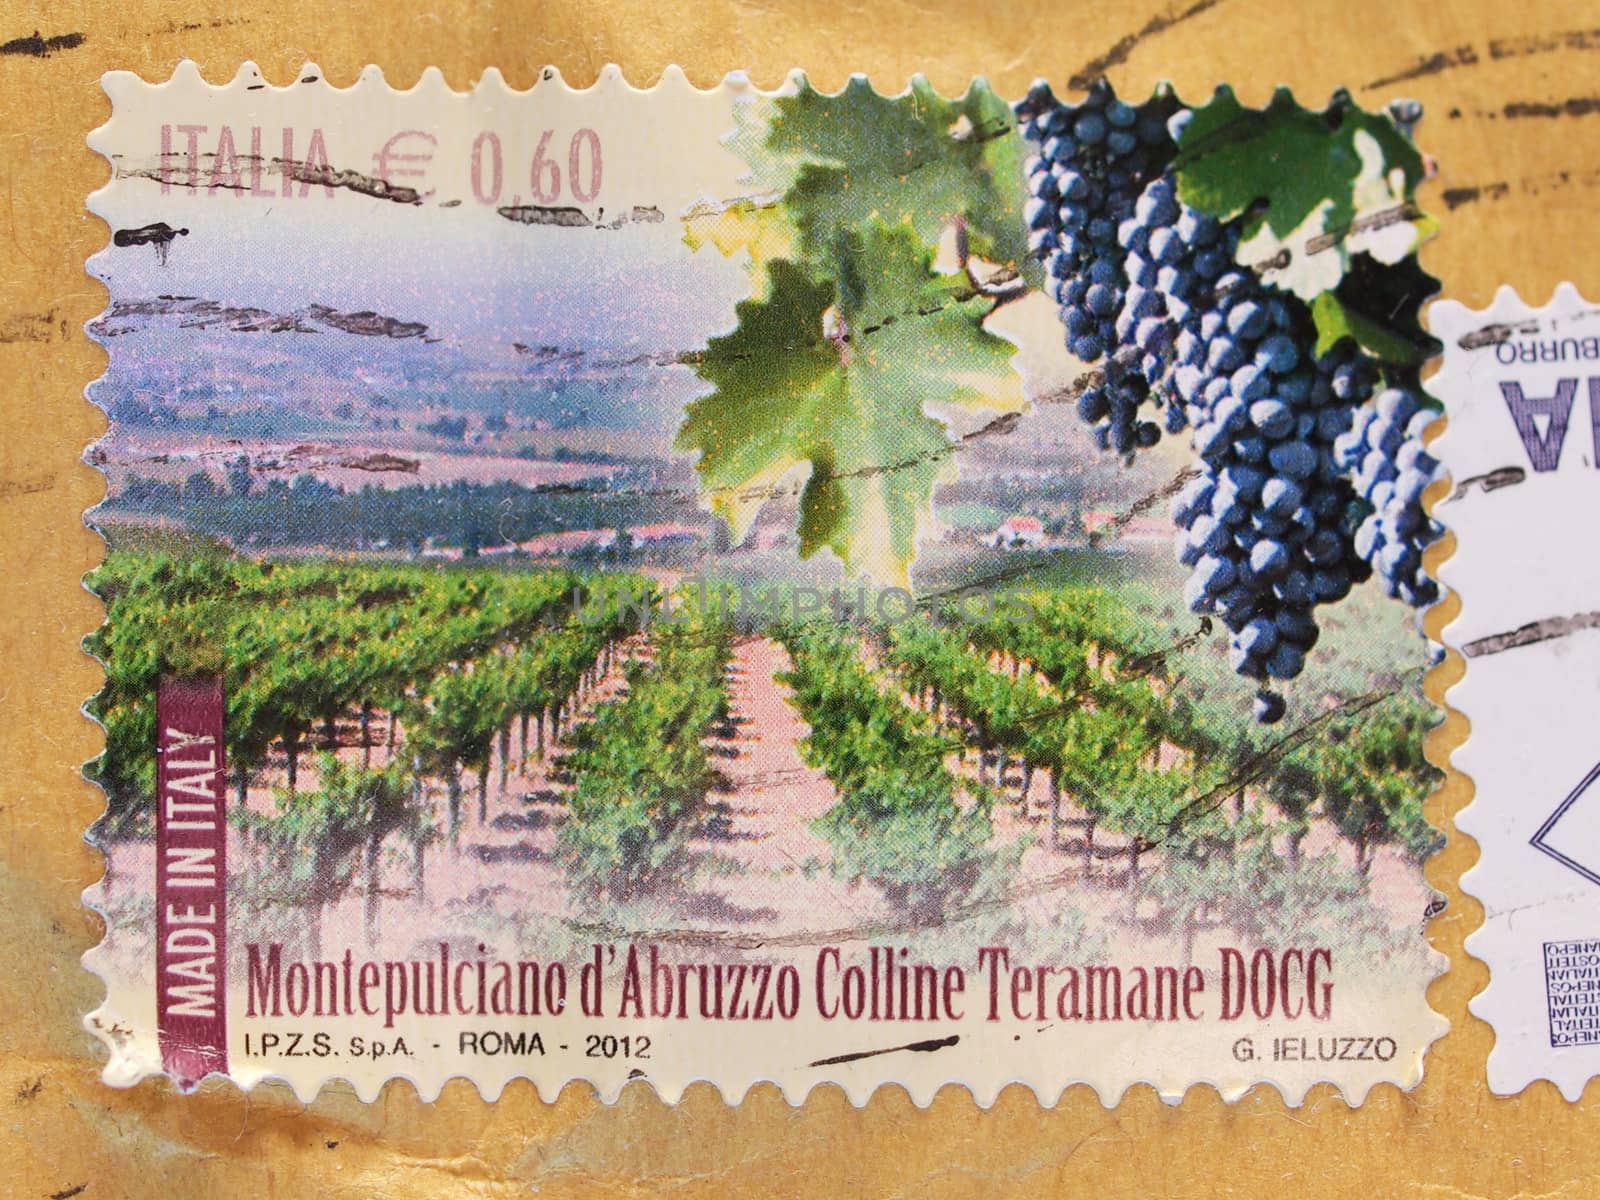 Montepulciano D'Abruzzo stamp from Italy by paolo77